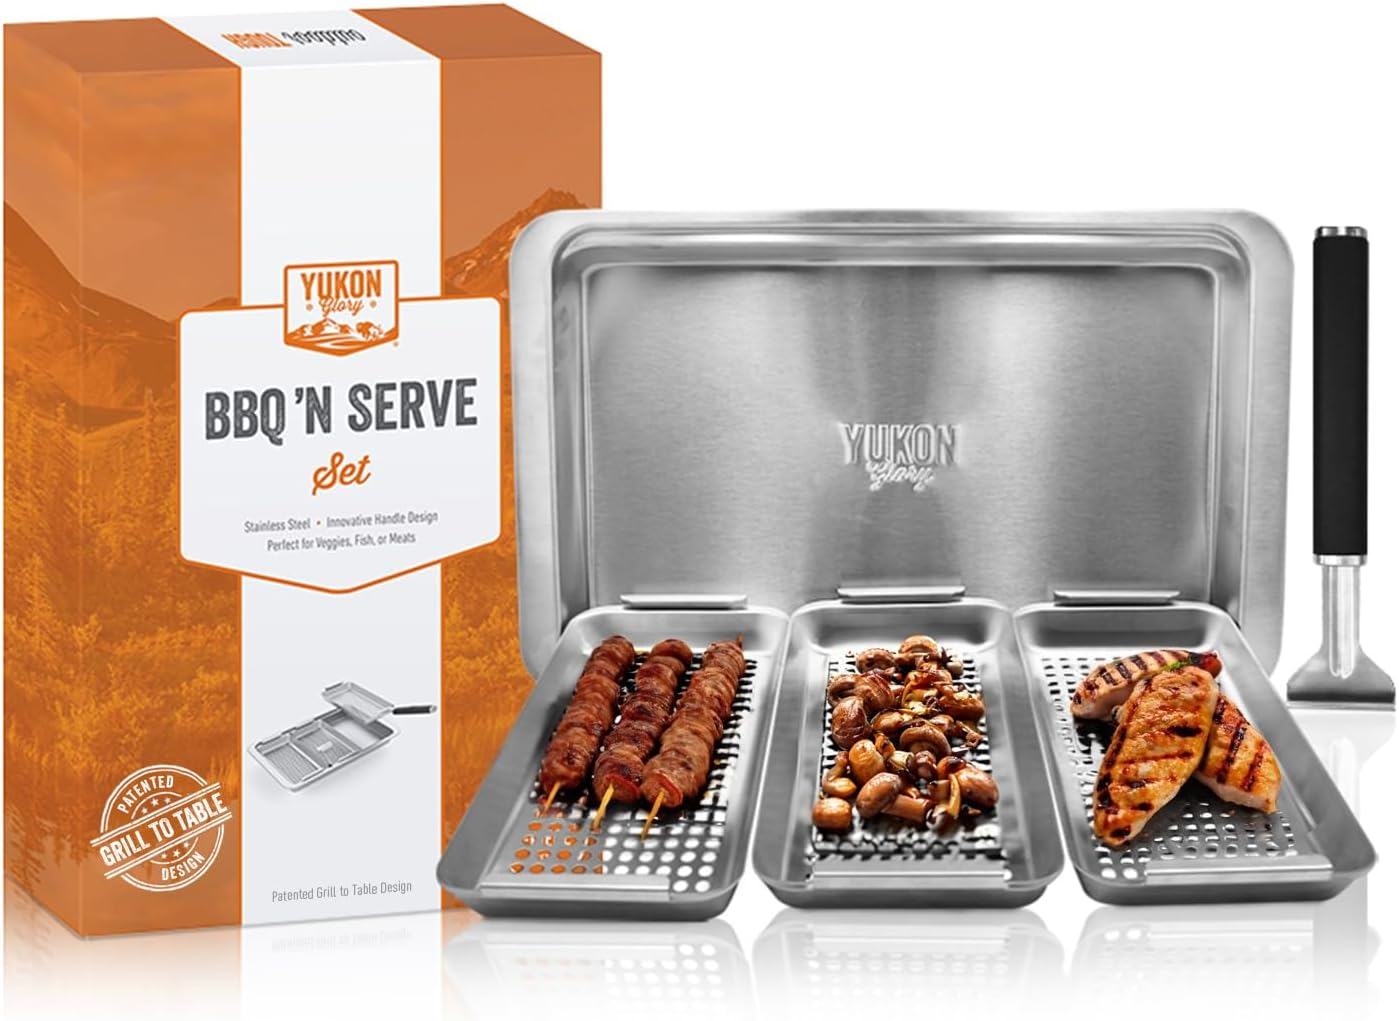 Yukon Glory™ BBQ 'N SERVE Grill Basket Set - Includes 3 Grilling Baskets a Serving Tray & Clip-on Handle - "Patented Grill-to-Table Design" Perfect For Grilling Fish Veggies & Meats - Barbecue Whizz...Watch My Smoke!